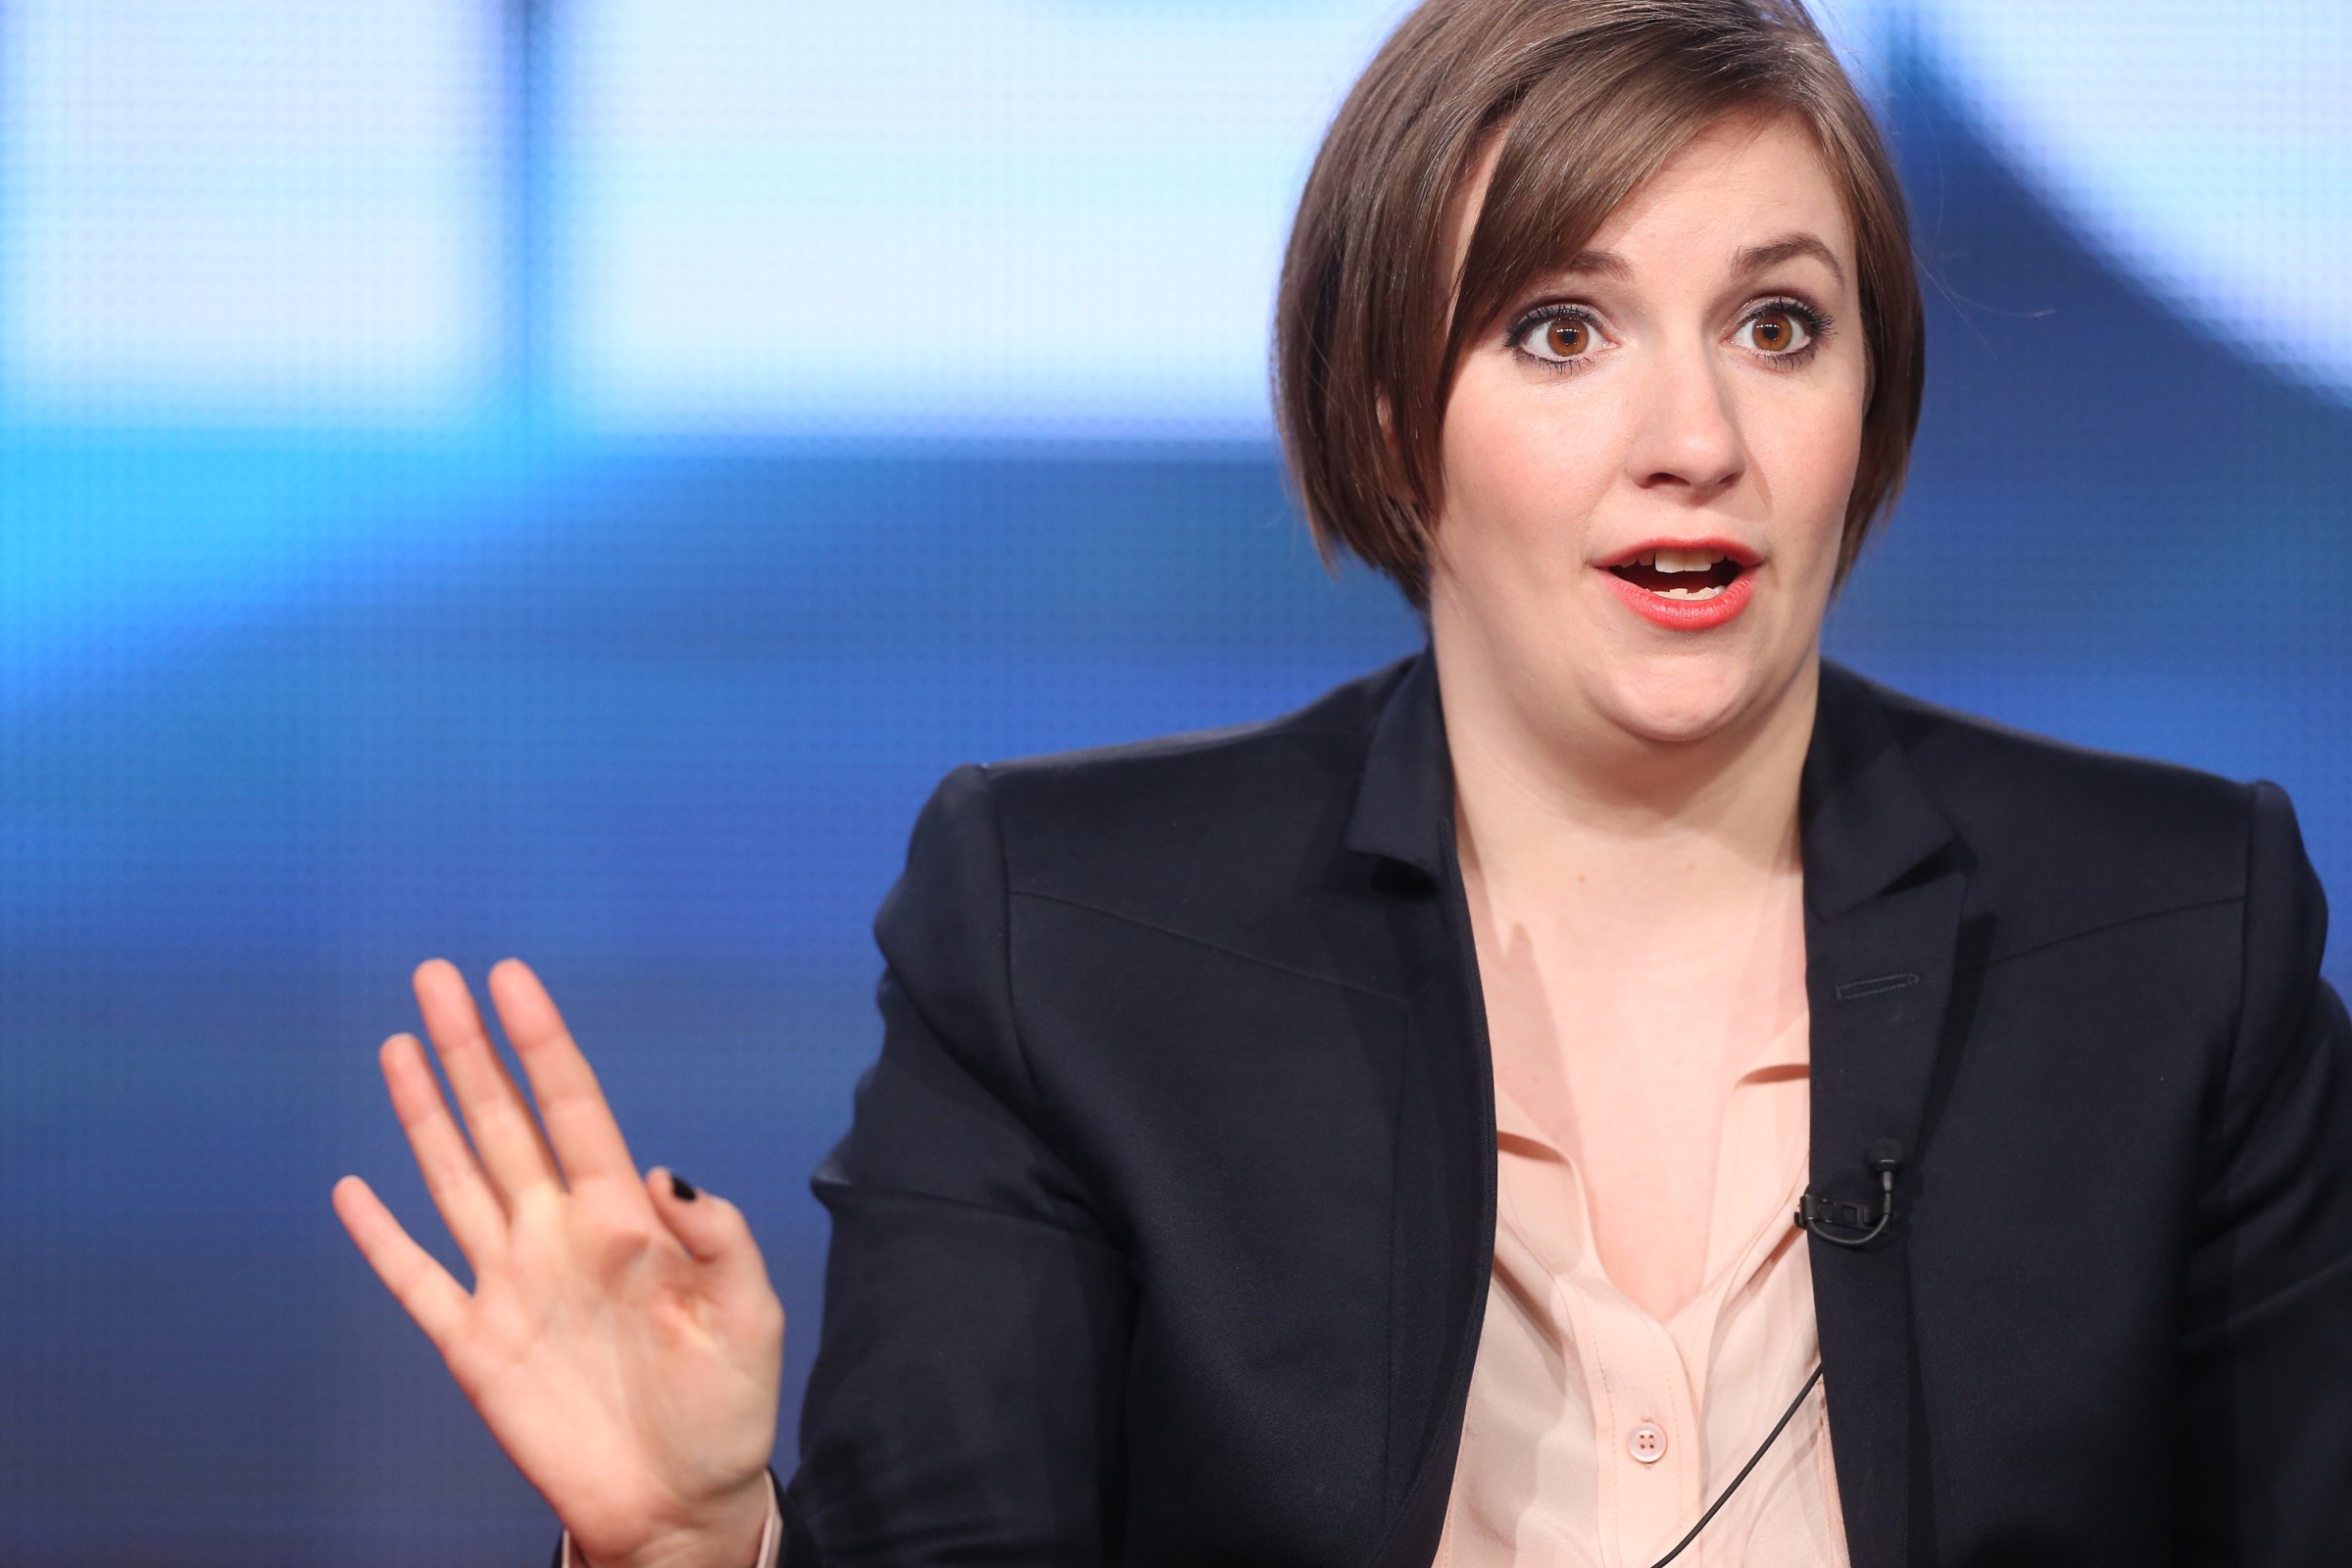 Lena Dunham speaks onstage during the 'Girls' panel discussion at the HBO portion of the 2014 Winter Television Critics Association tour at the Langham Hotel on Jan. 9, 2014 in Pasadena, California.